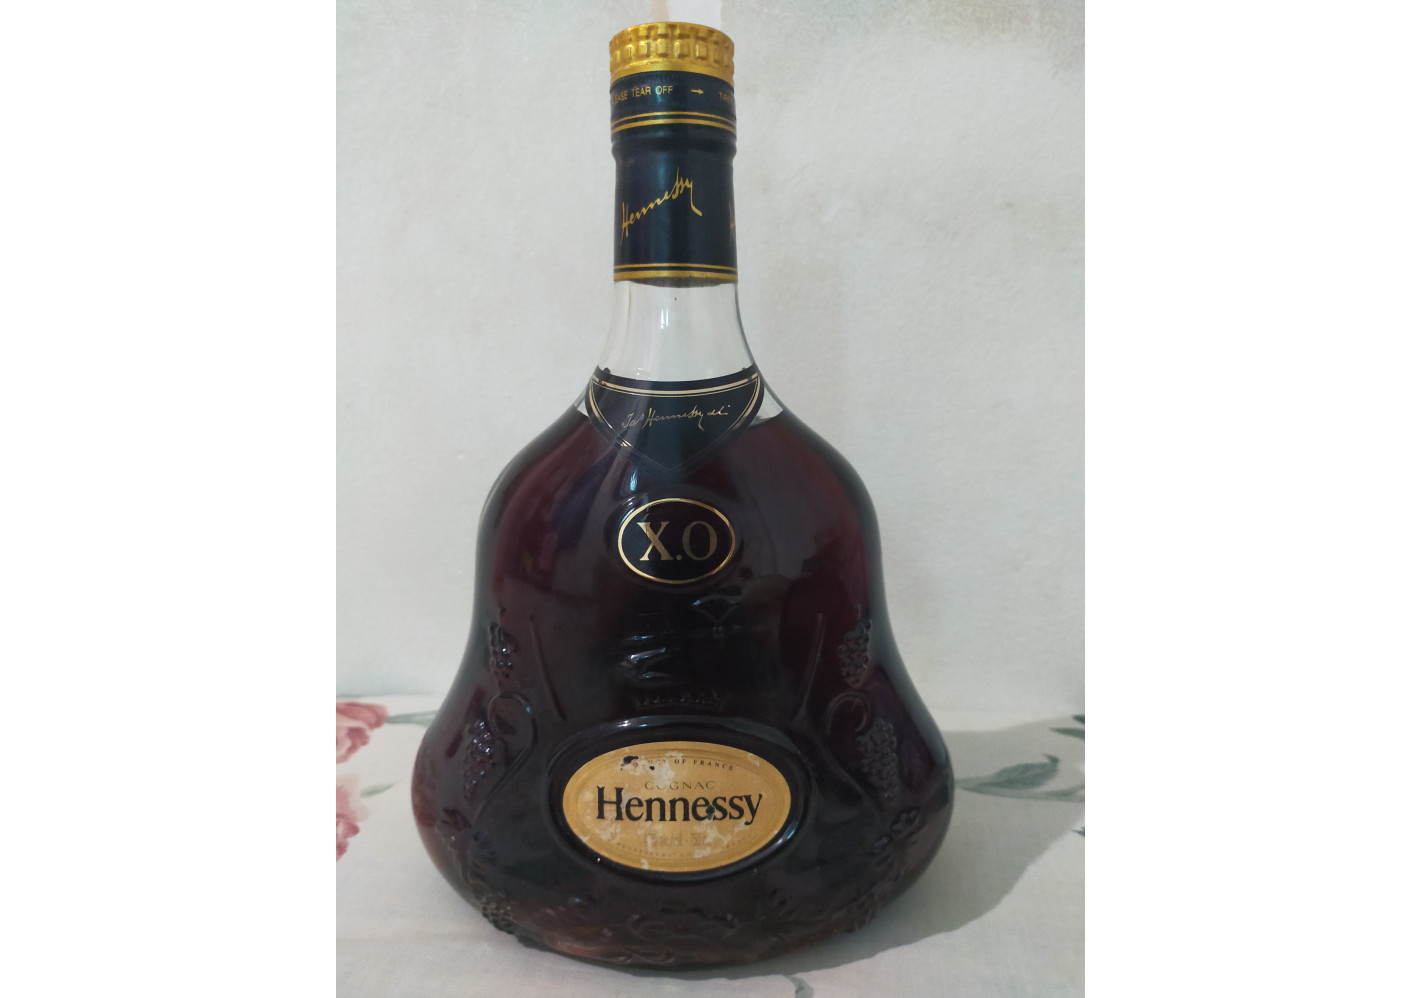 X.O. Hennessy Cognac - Hennessy Cognac - cabinet7